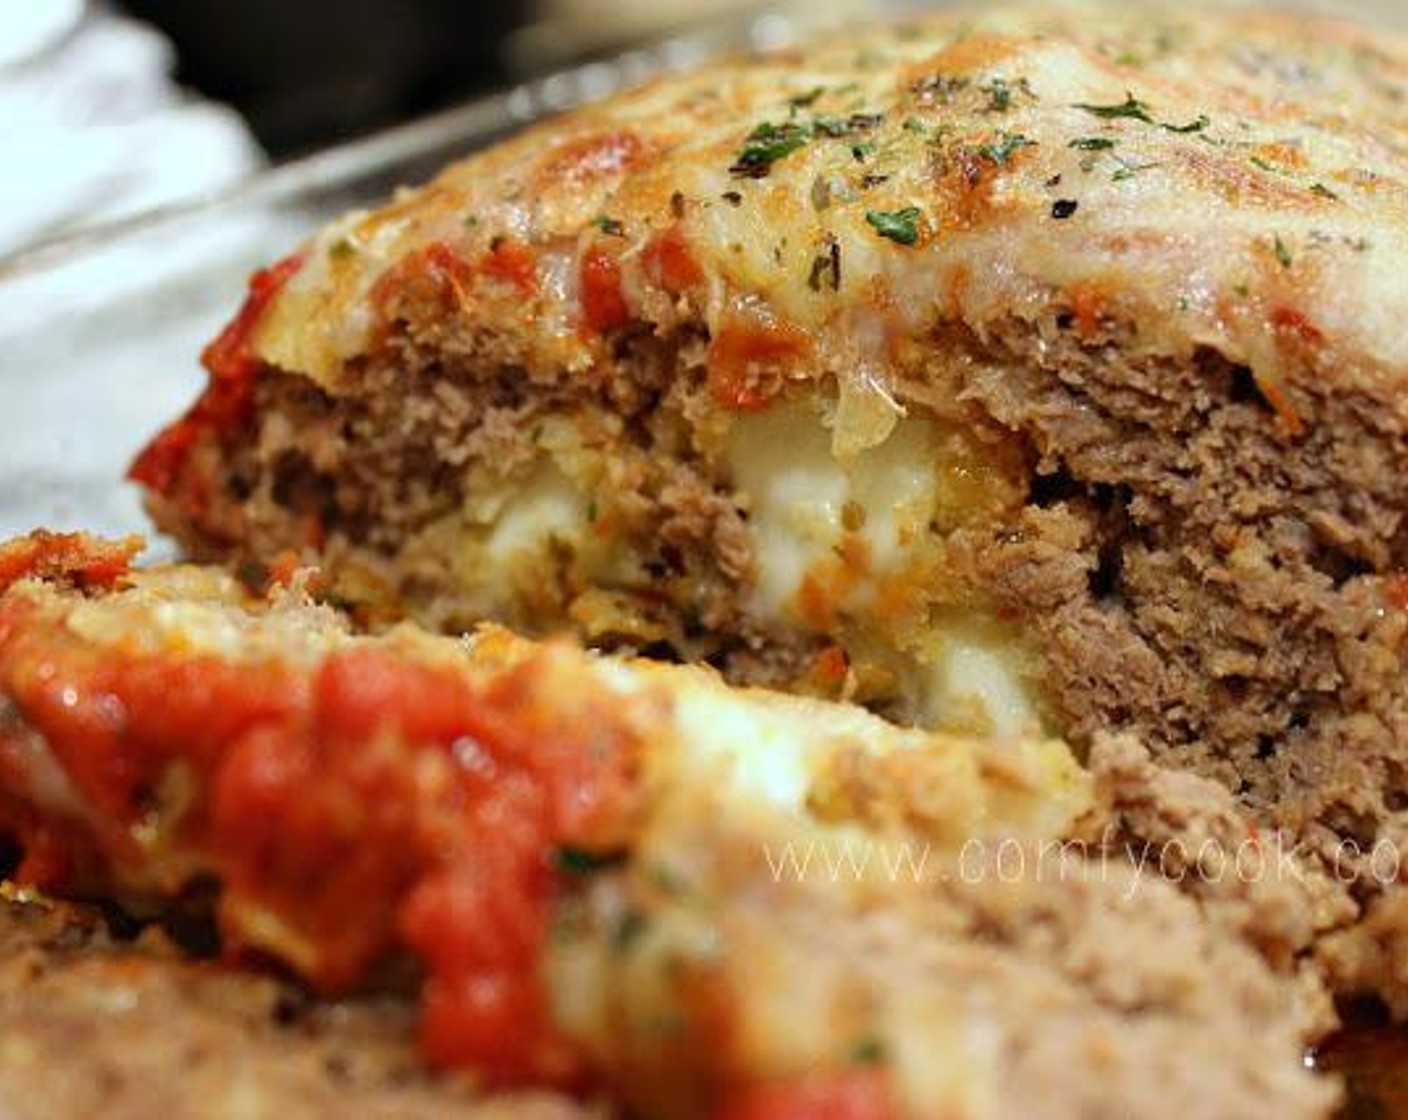 Stuffed Pizza Meatloaf